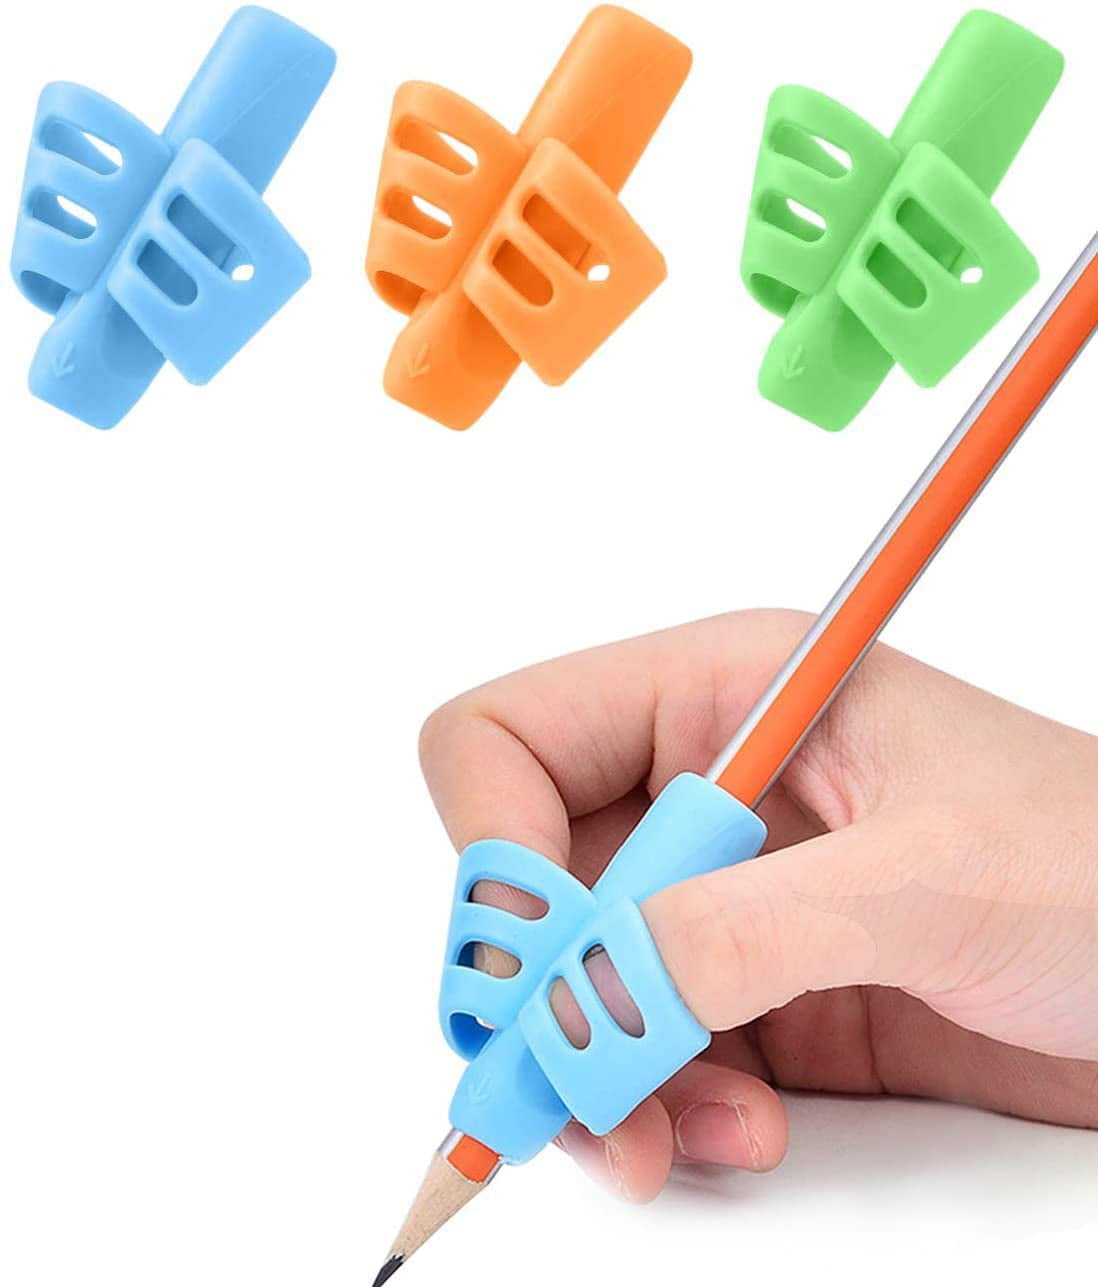 Pencil Grips for Kids Handwriting Writing Aid Gripper Trainer Posture Correction 